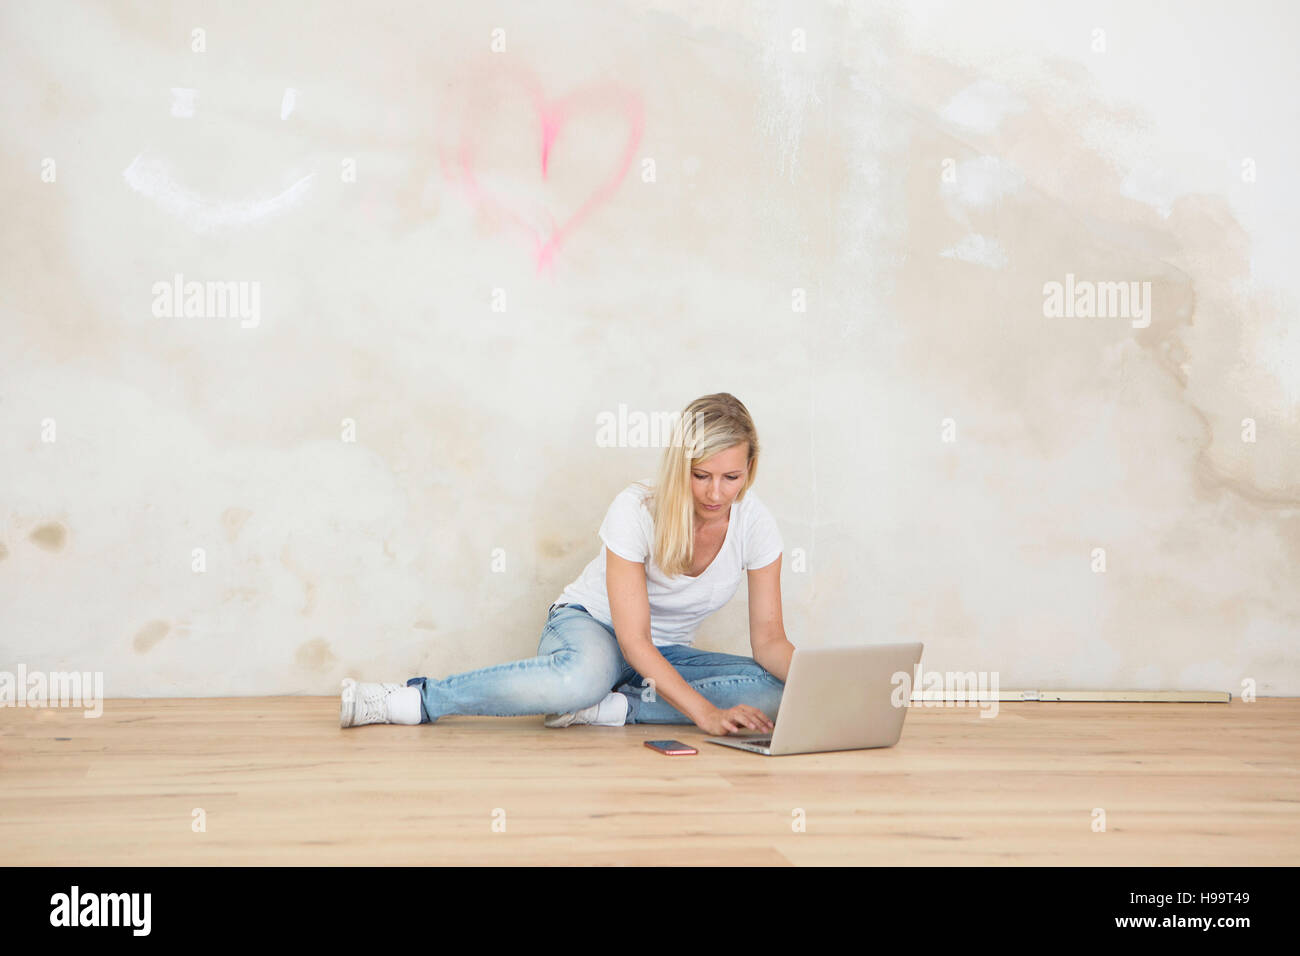 Woman using laptop during renovation in apartment Stock Photo